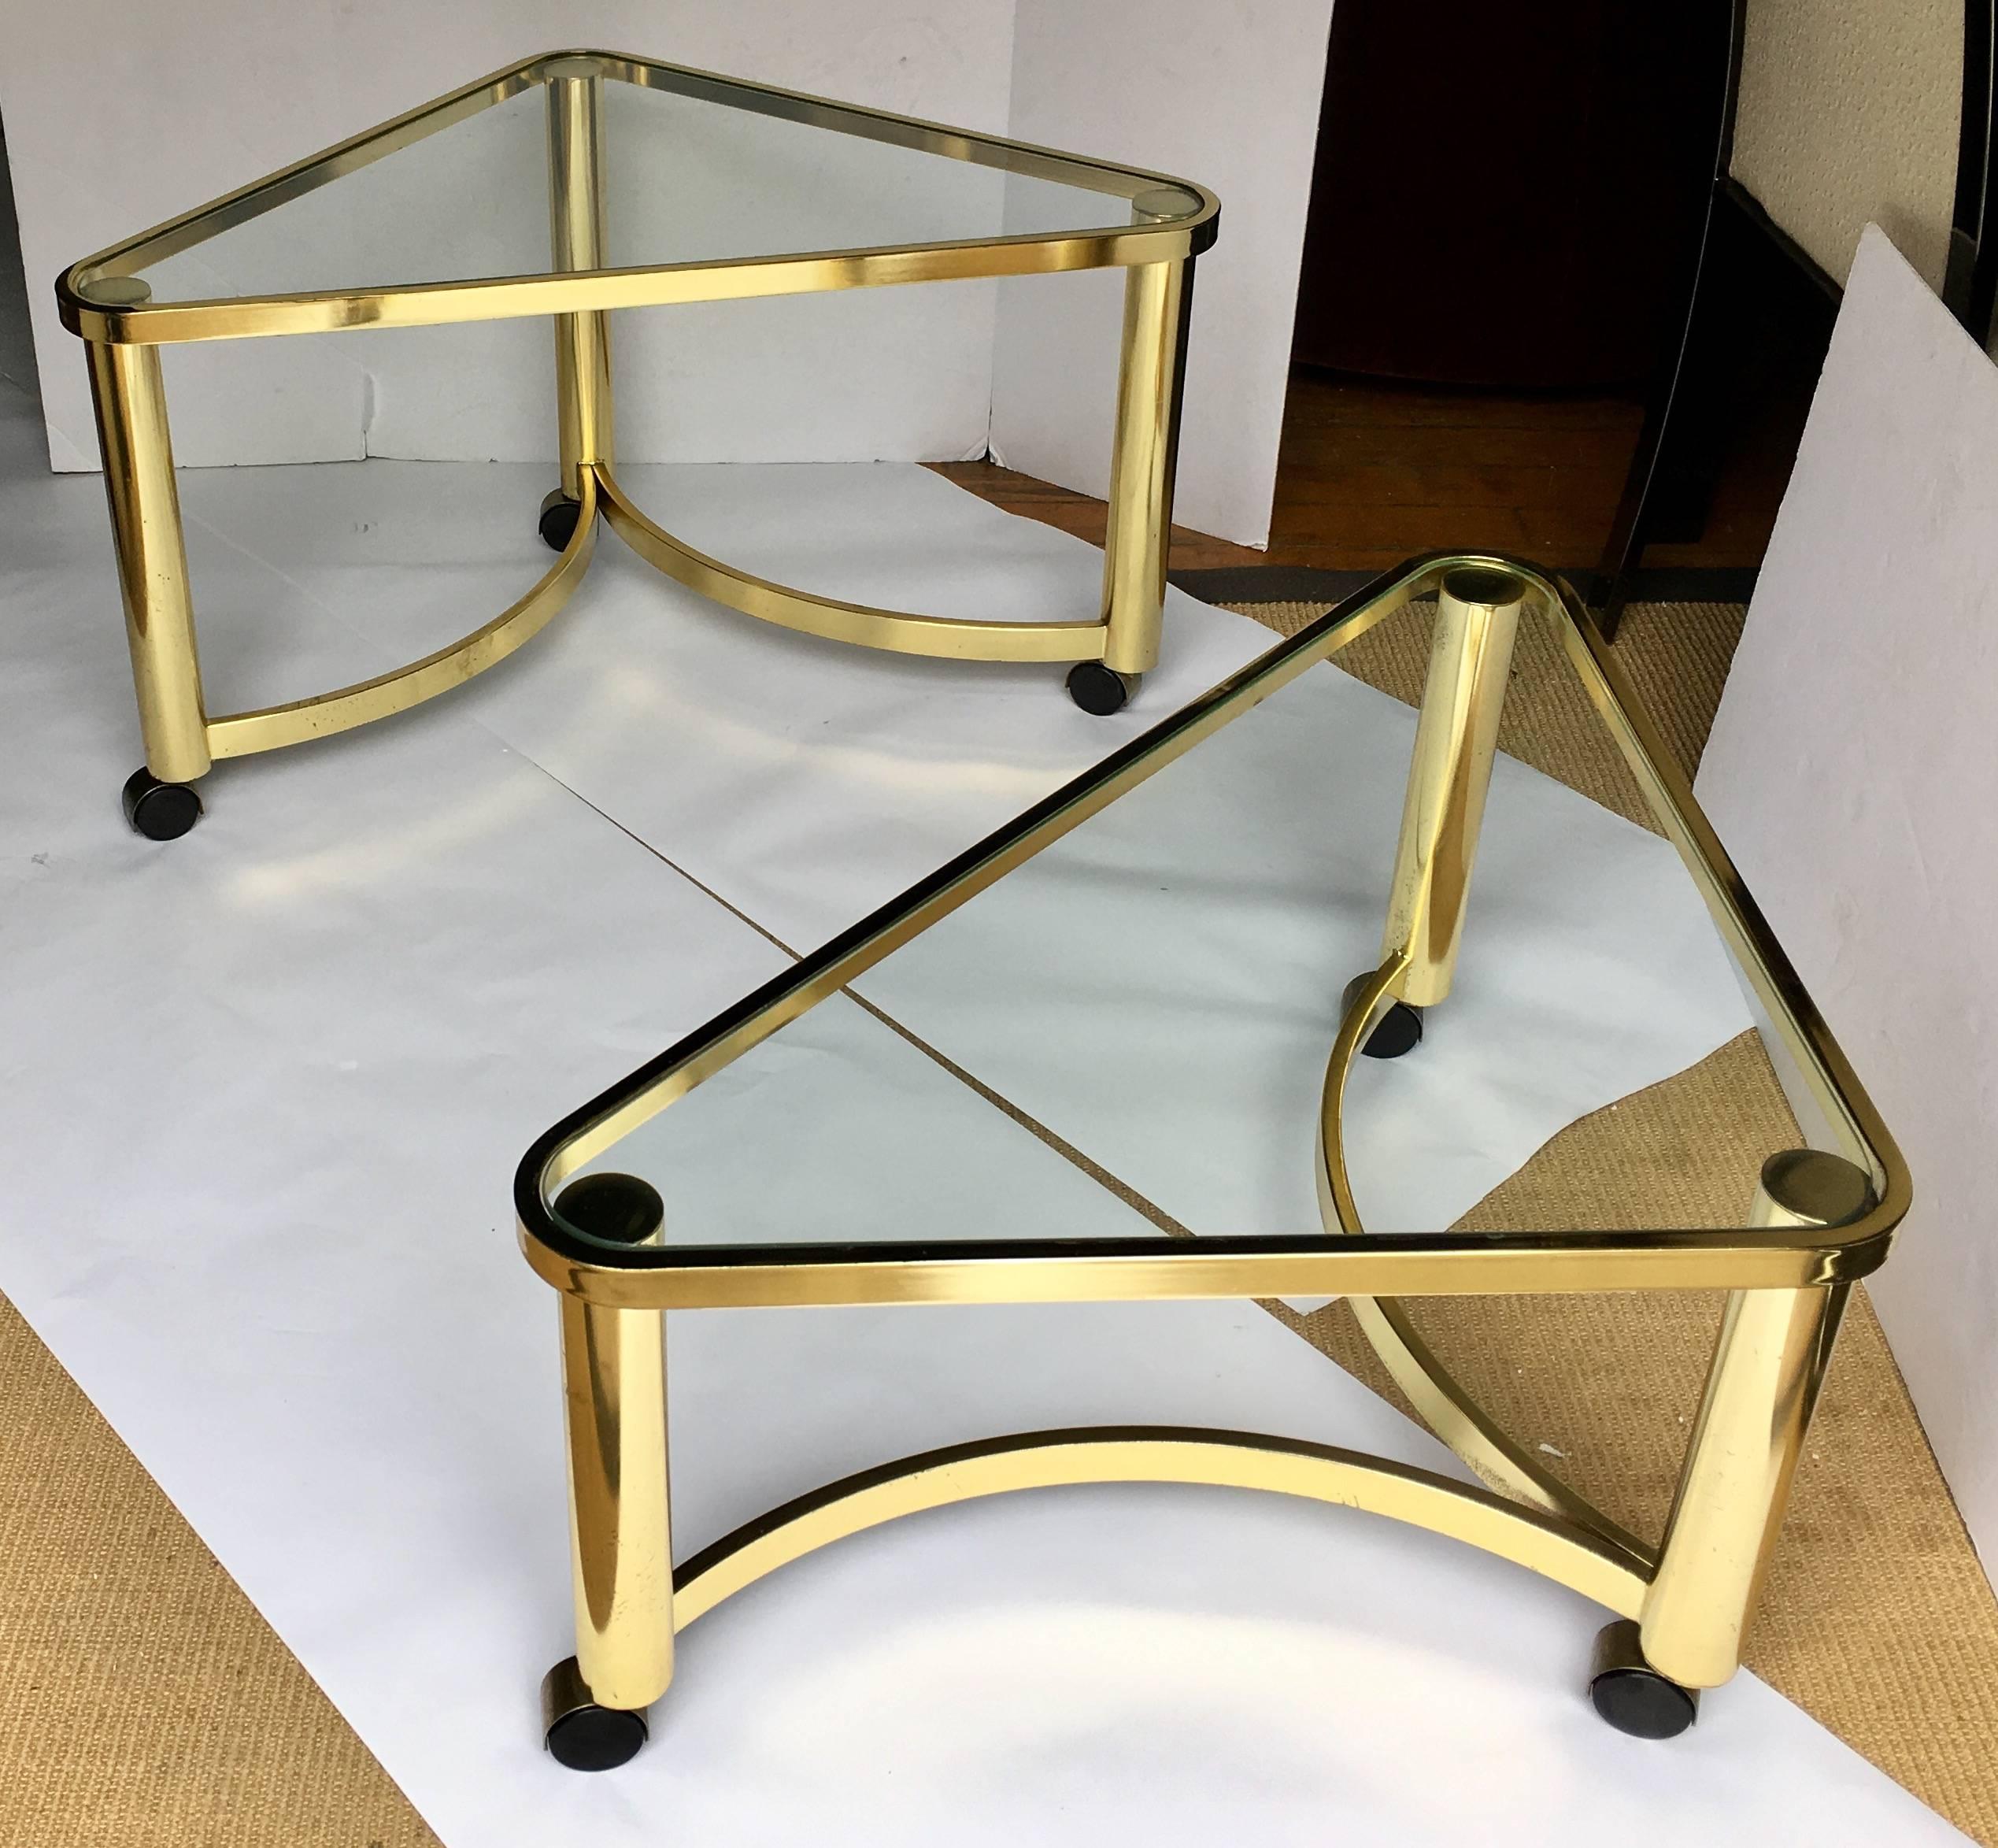 Set of two brass-plated sculptural nesting coffee tables by Design Institute America, DIA. These Mid-Century Modern tables feature clear glass tops with tubular triangular bases on rolling casters. These geometric tables can also be used as side or